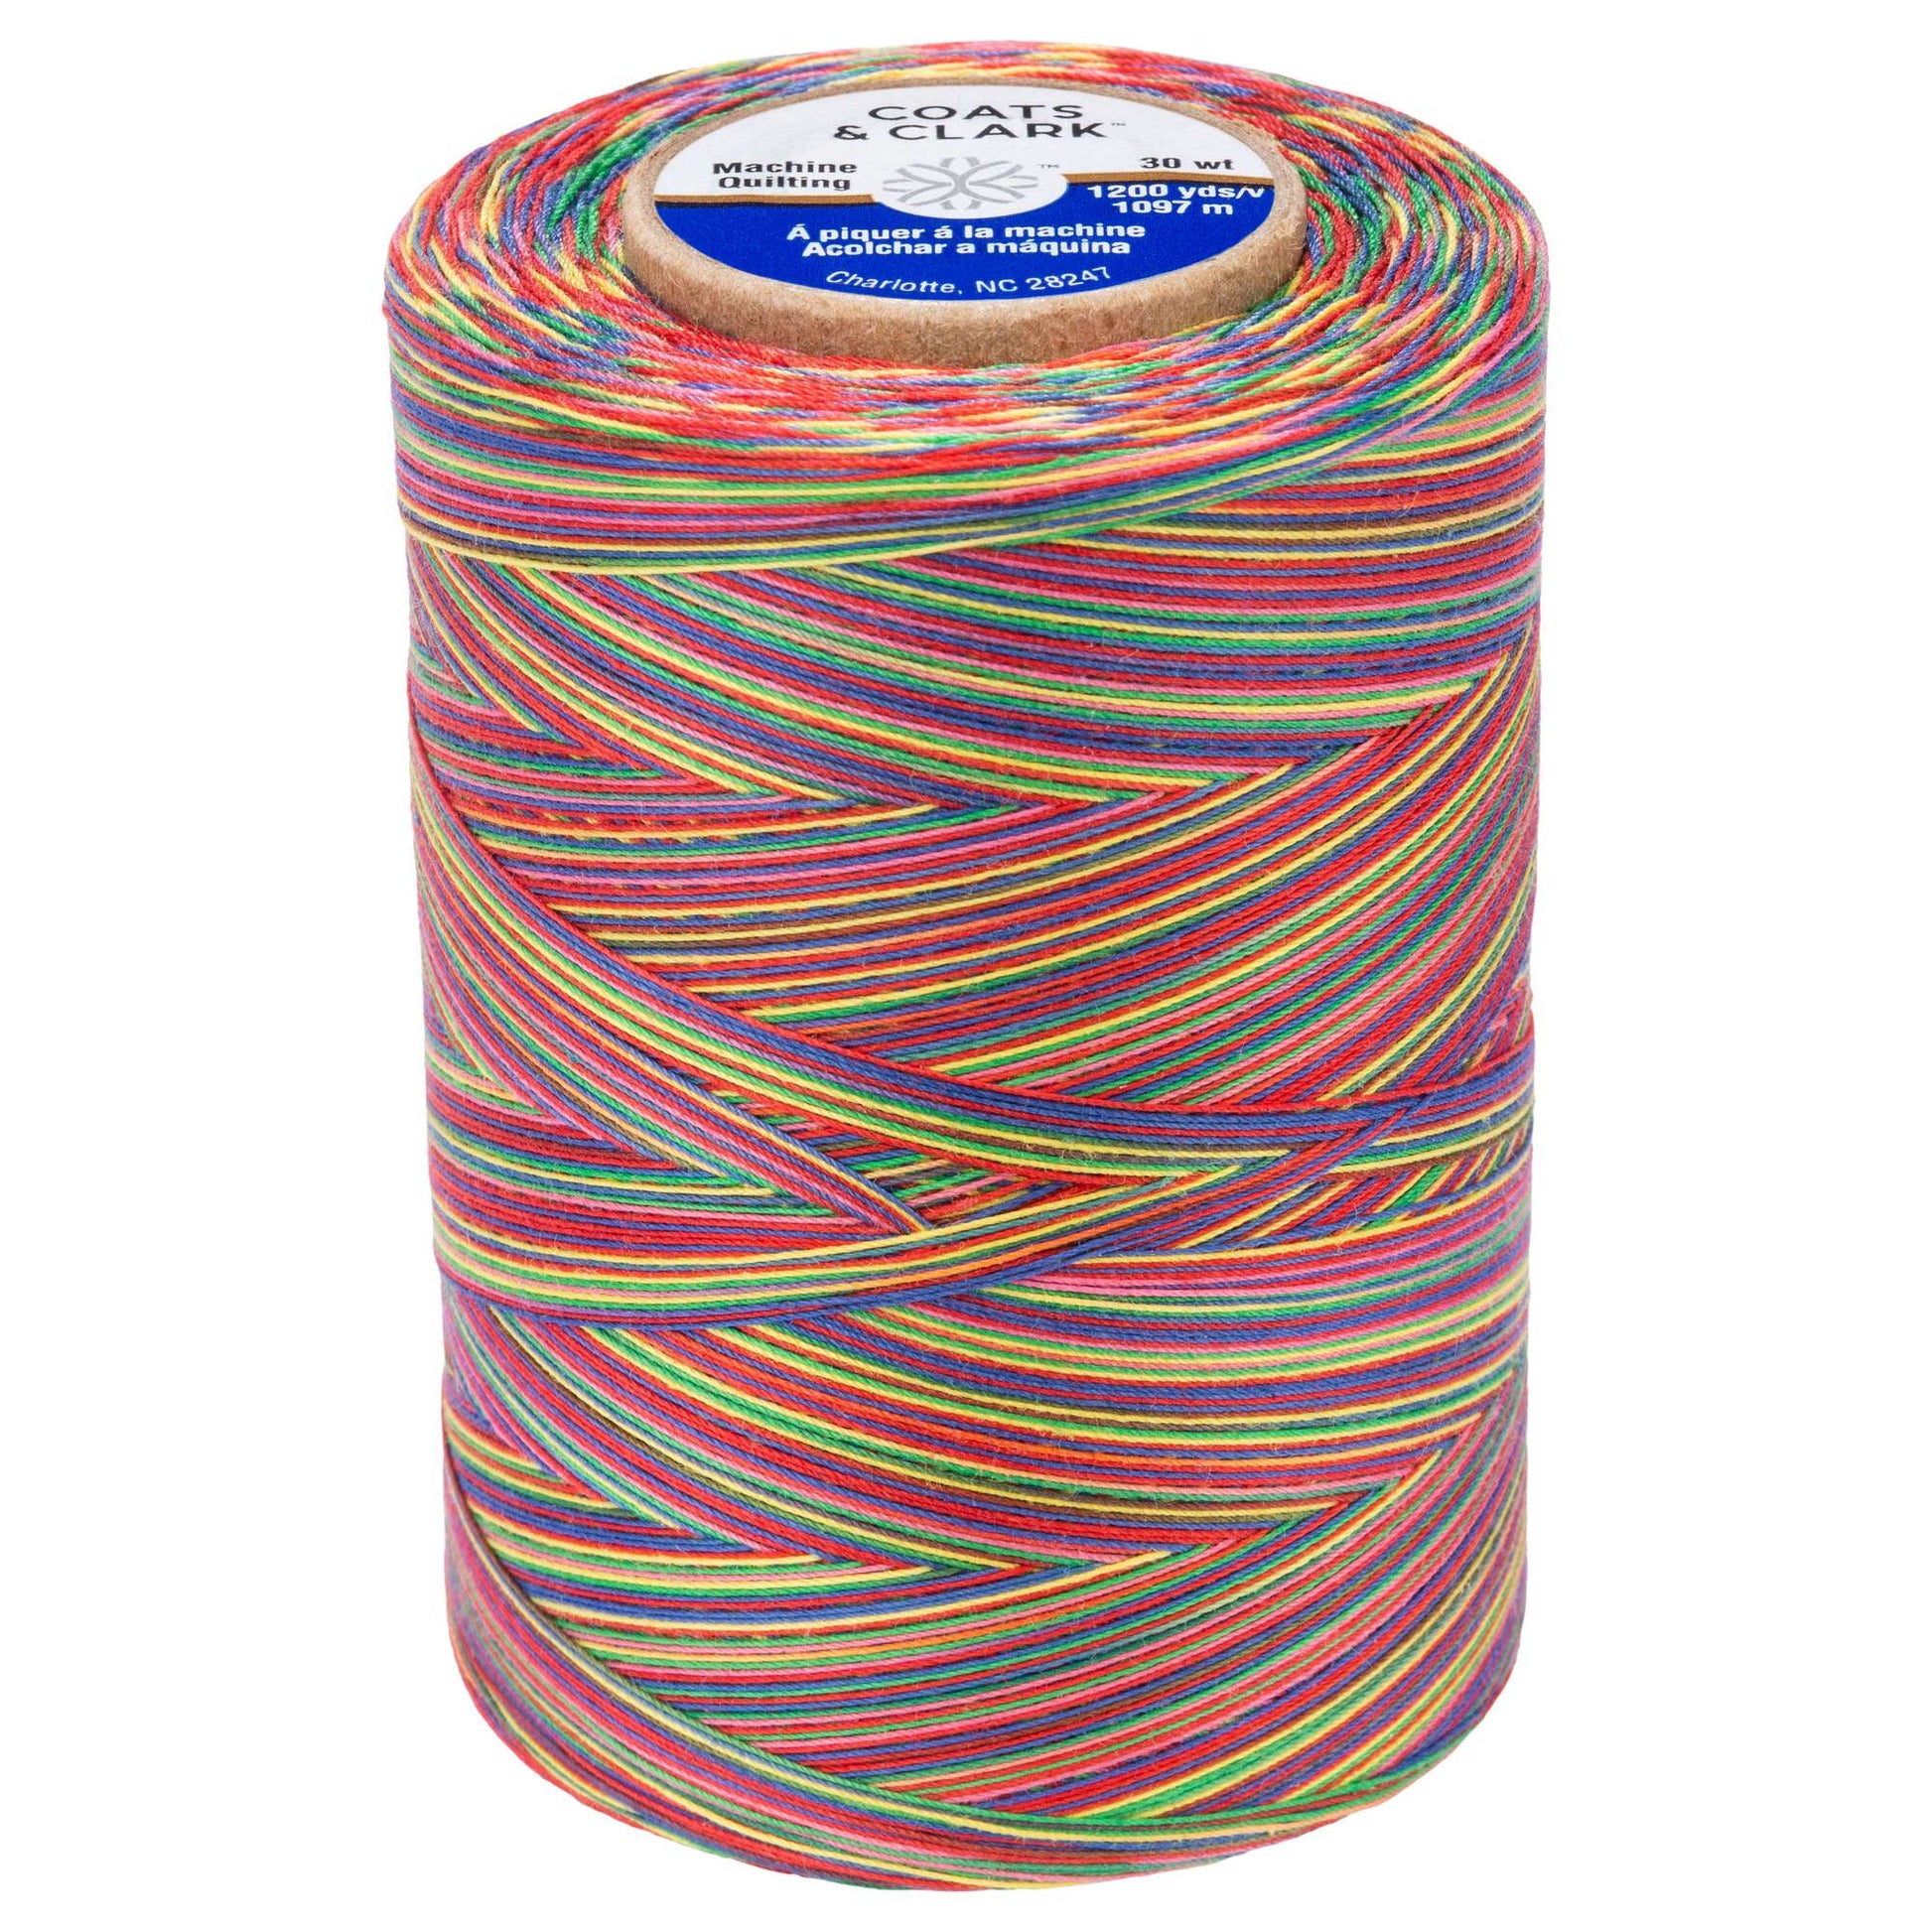 Coats & Clark Cotton Machine Quilting Multicolor Thread (1200 Yards) Over The Rainbow